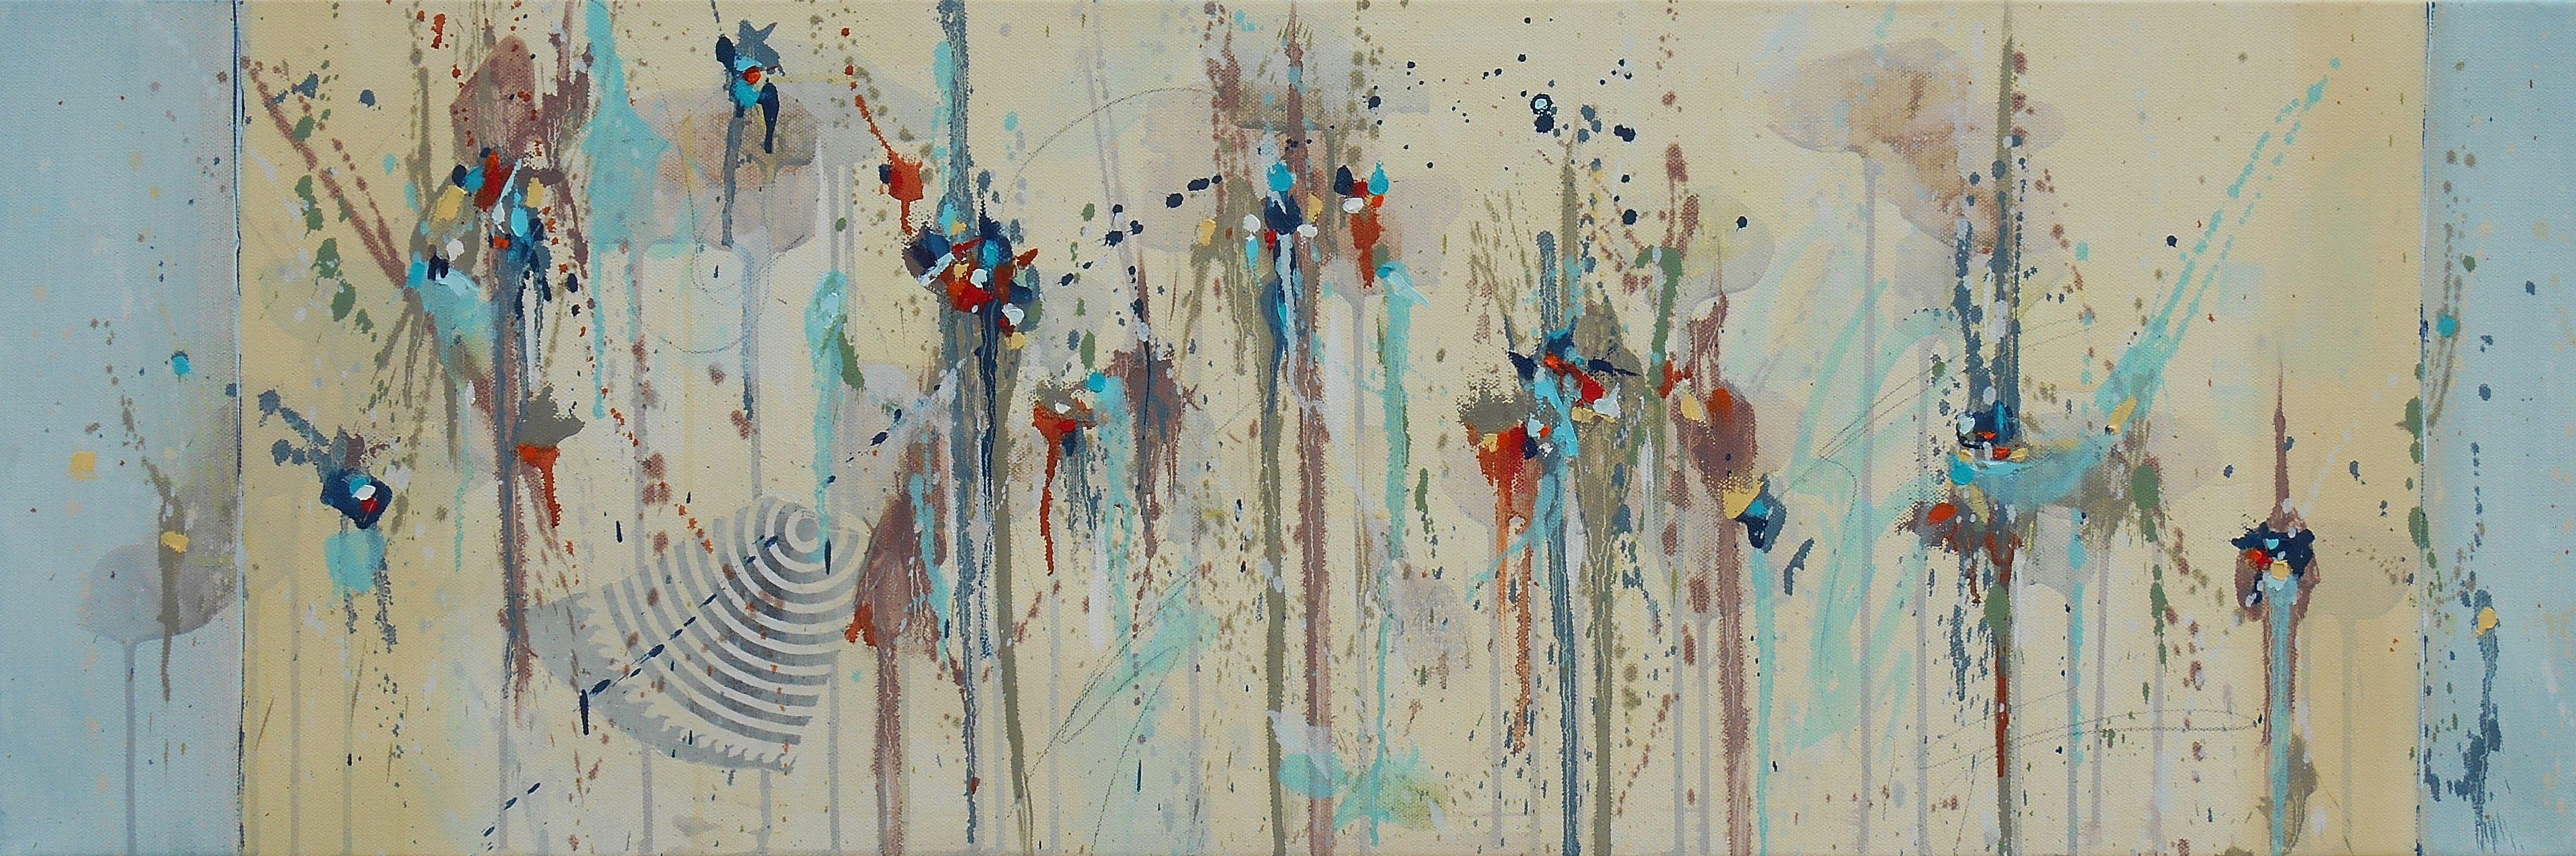 Cynthia Ligeros Abstract Painting - Circus of Invention, Abstract Oil Painting